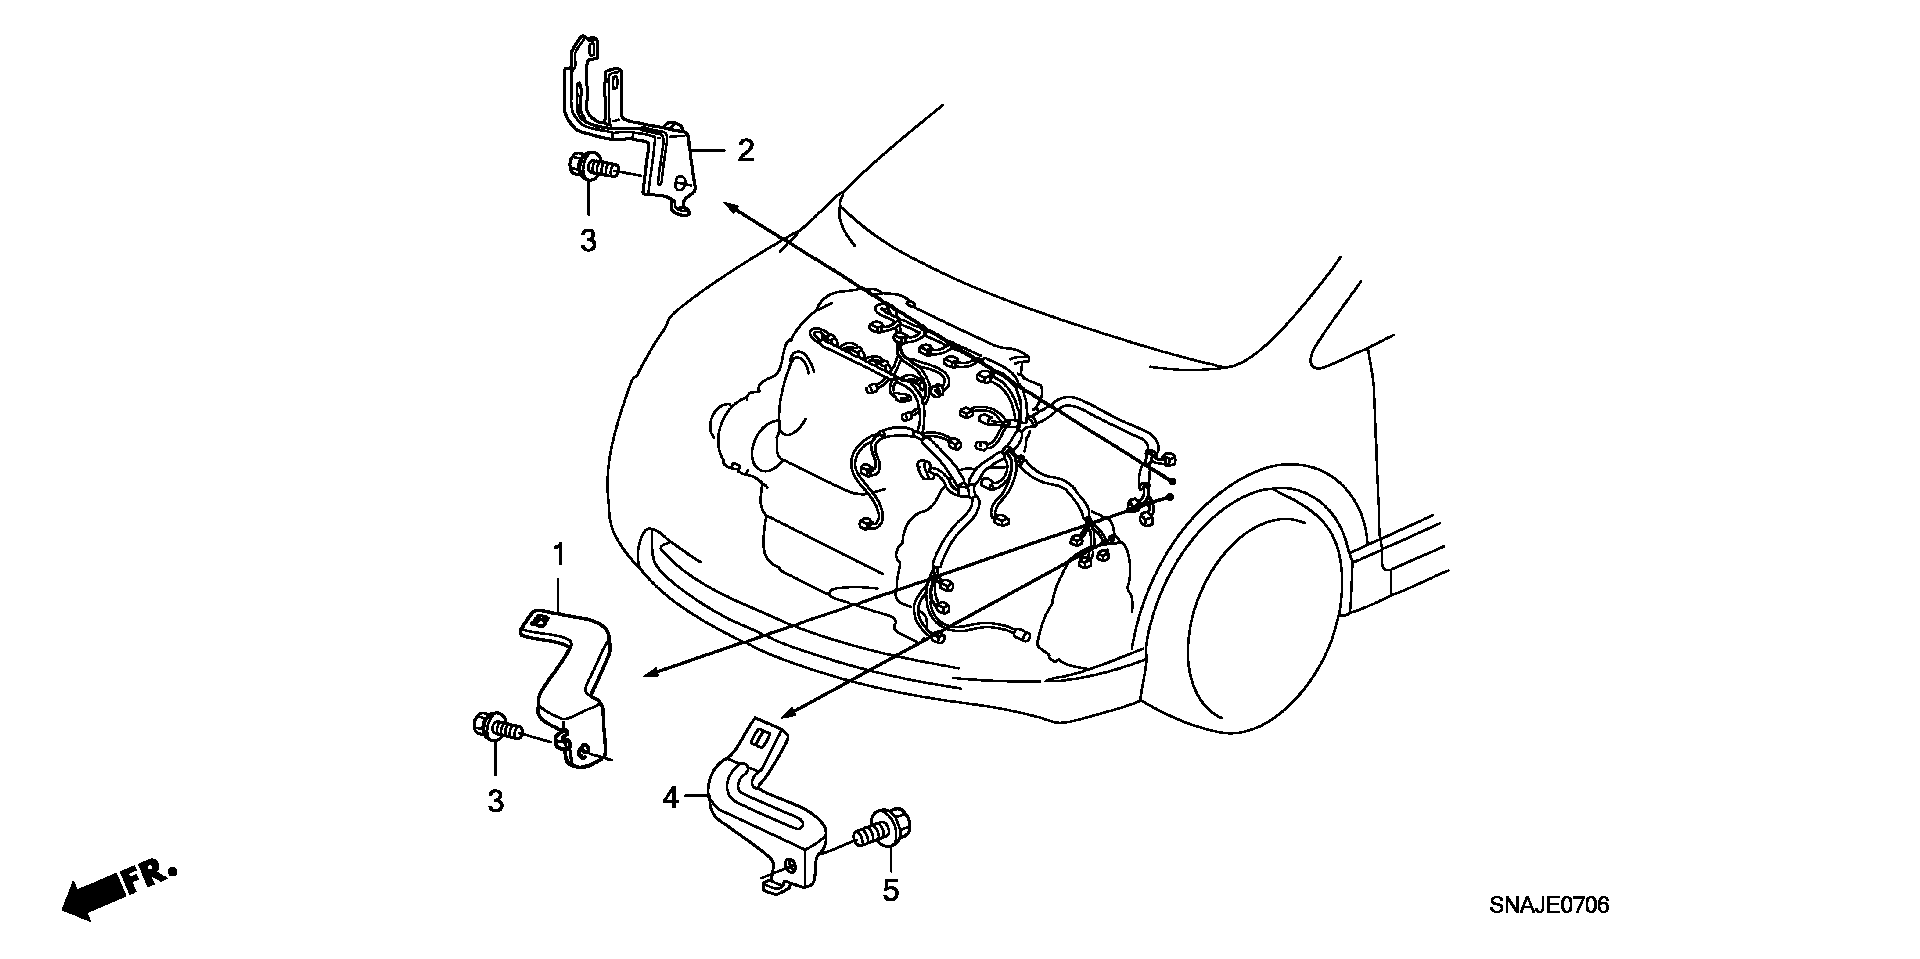 ENGINE WIRE HARNESS STAY(2.0L)